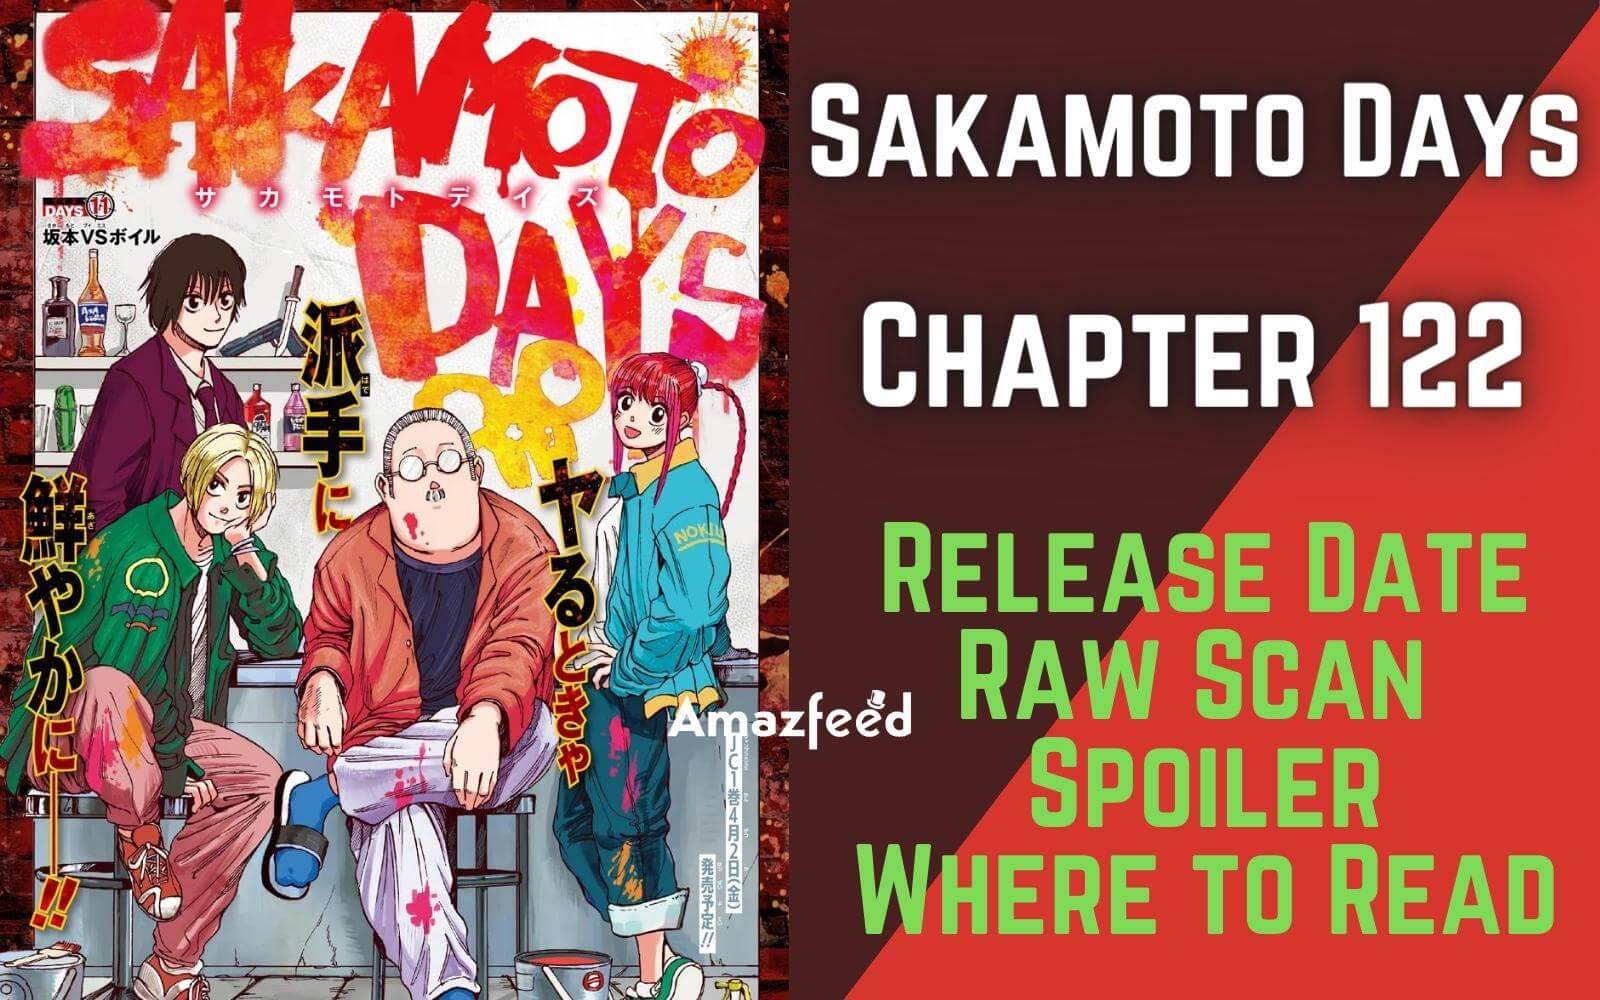 Sakamoto Days chapter 122 spoilers, what to expect, release date